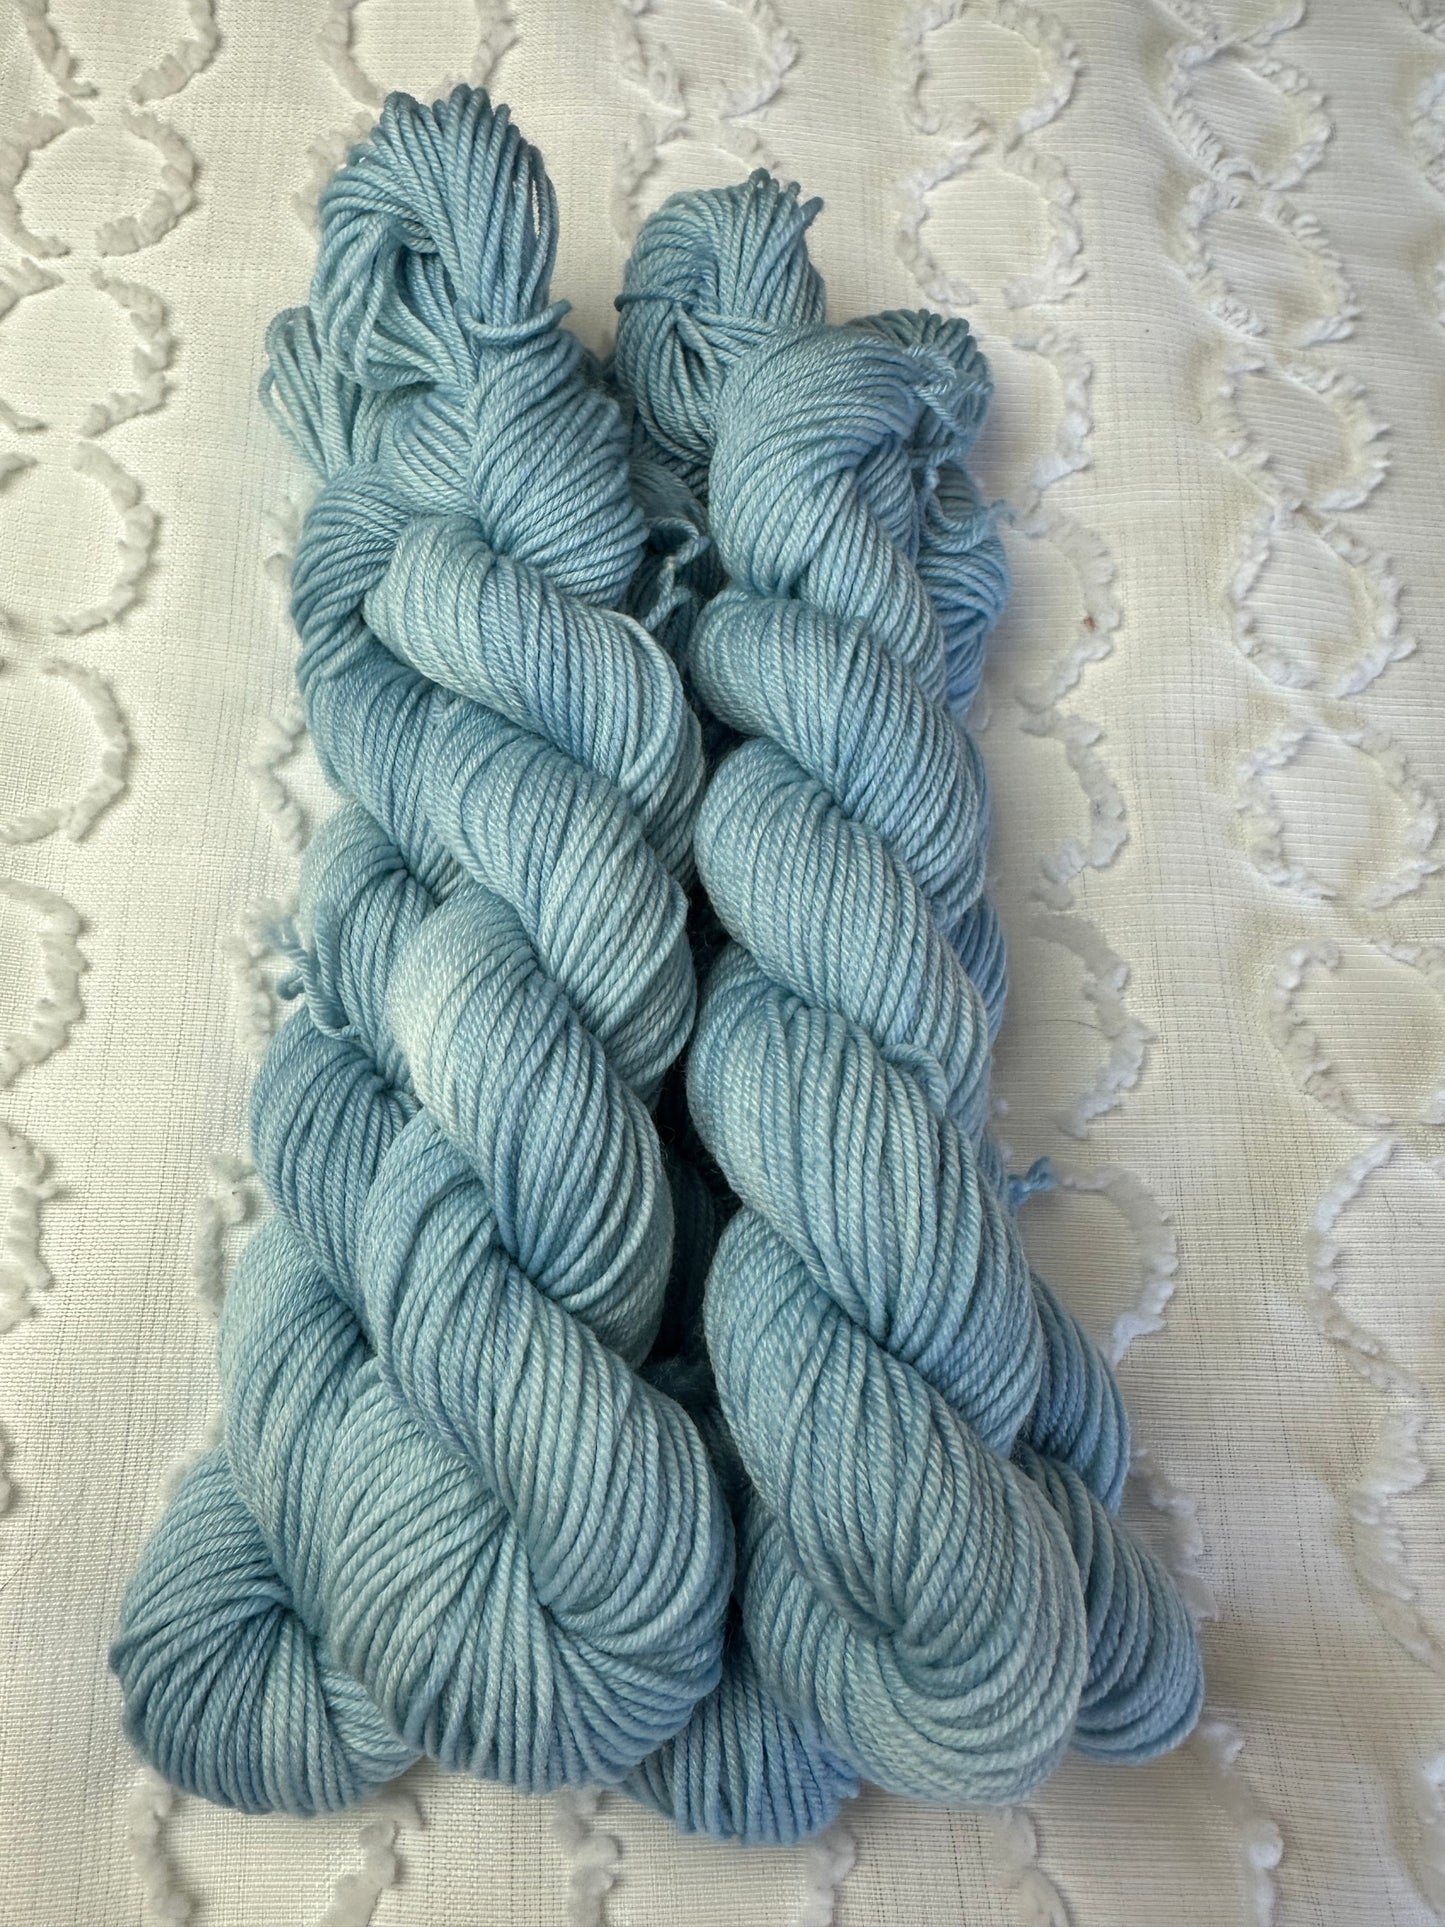 Winter Pillow Lace / Upland Sky Blue